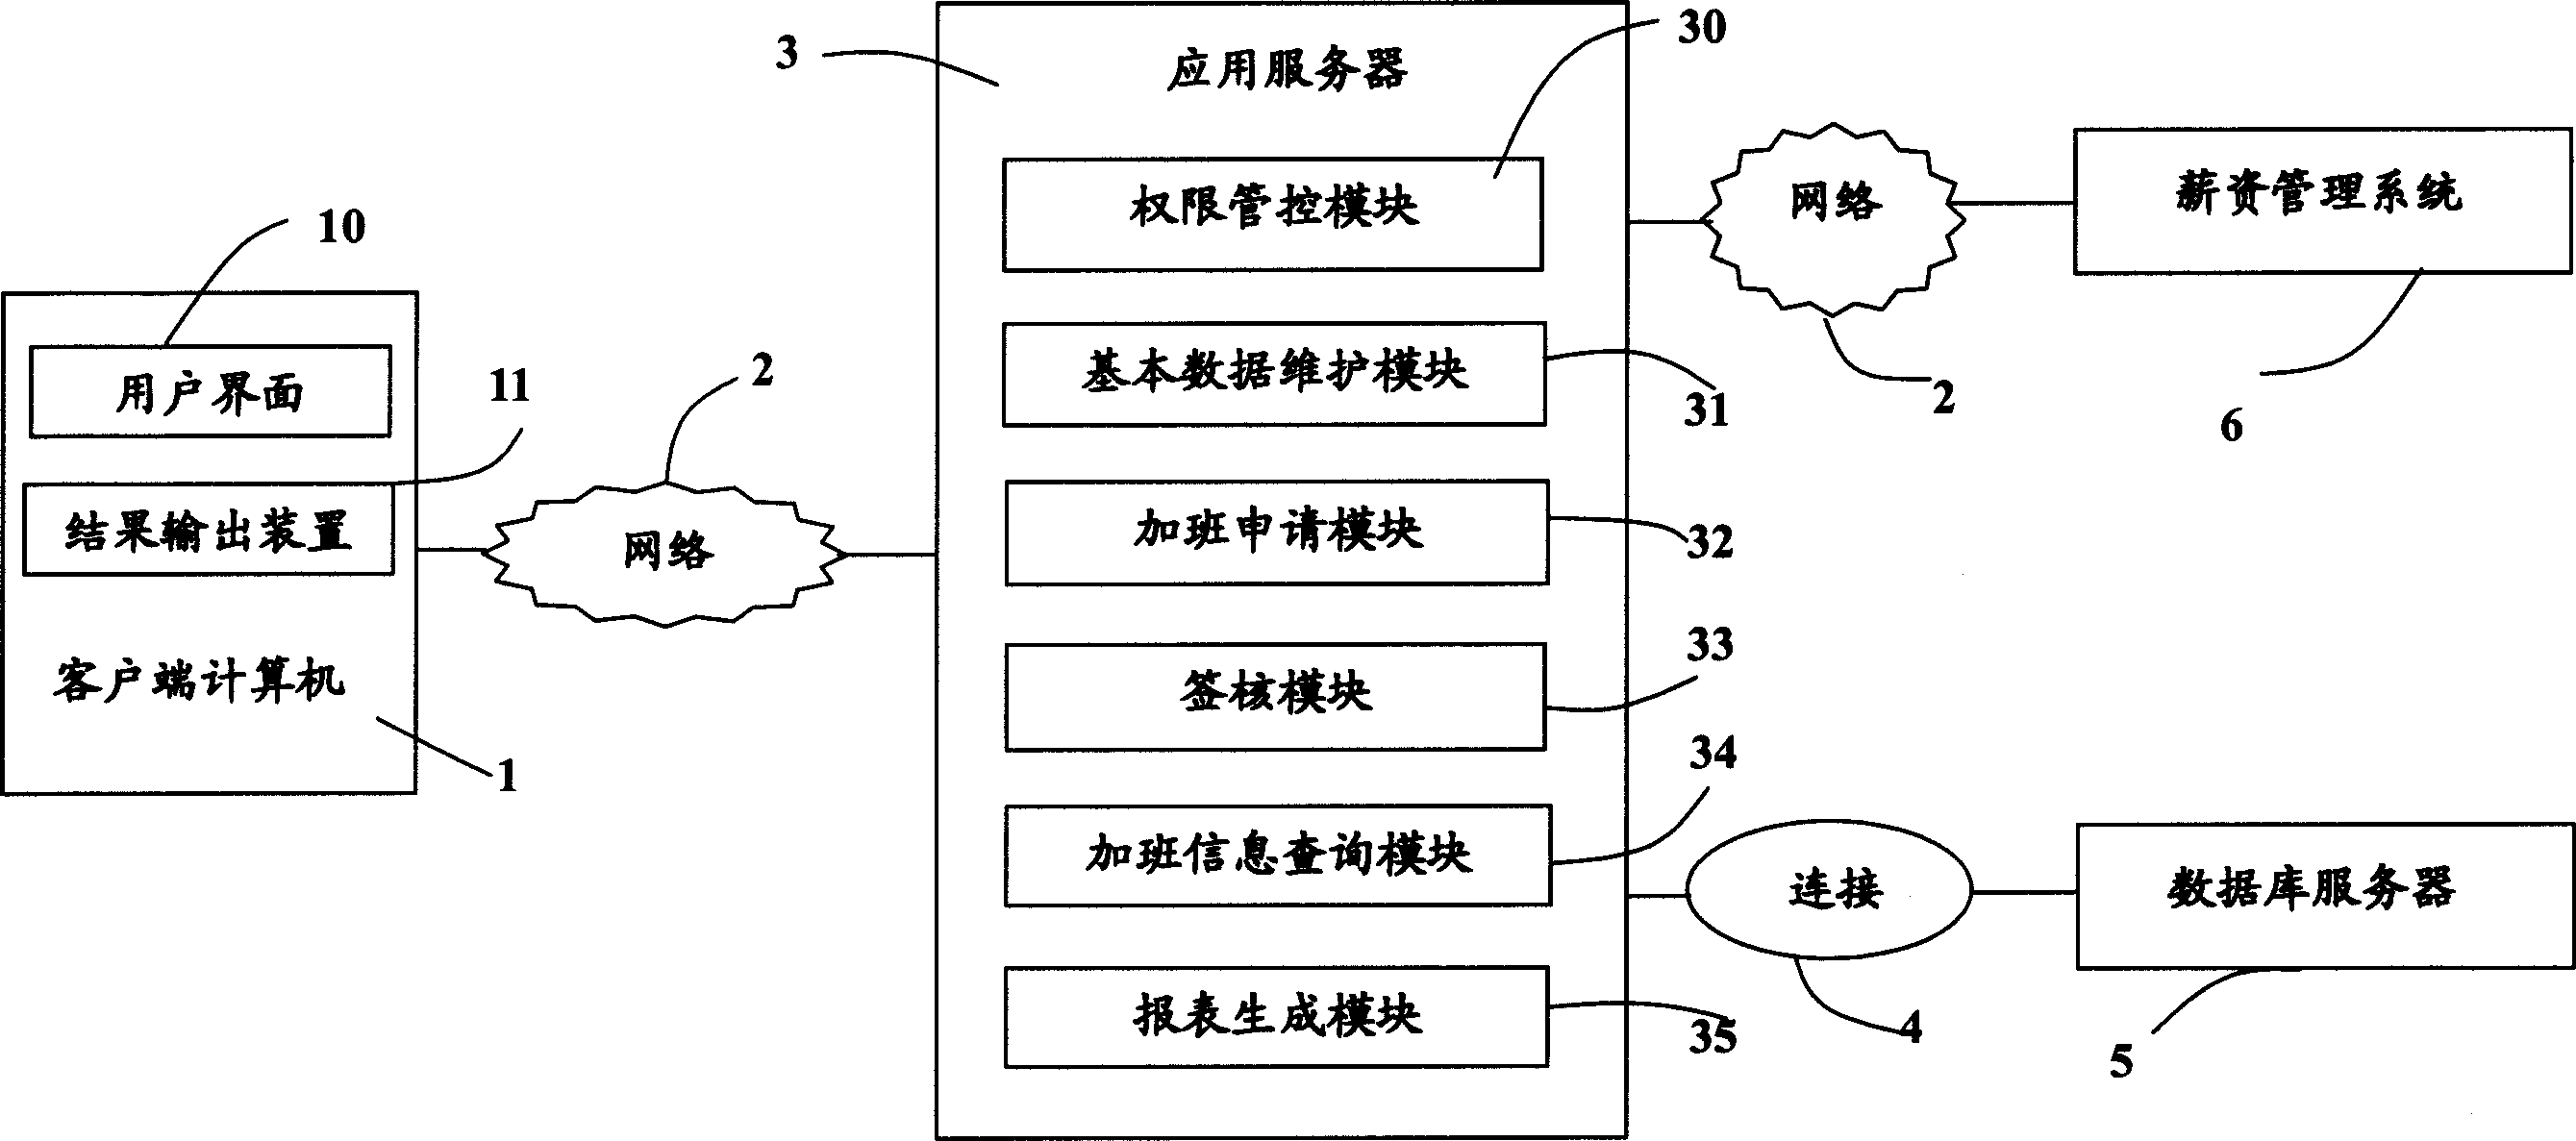 Dynamic controlling system and method for employee extra duty